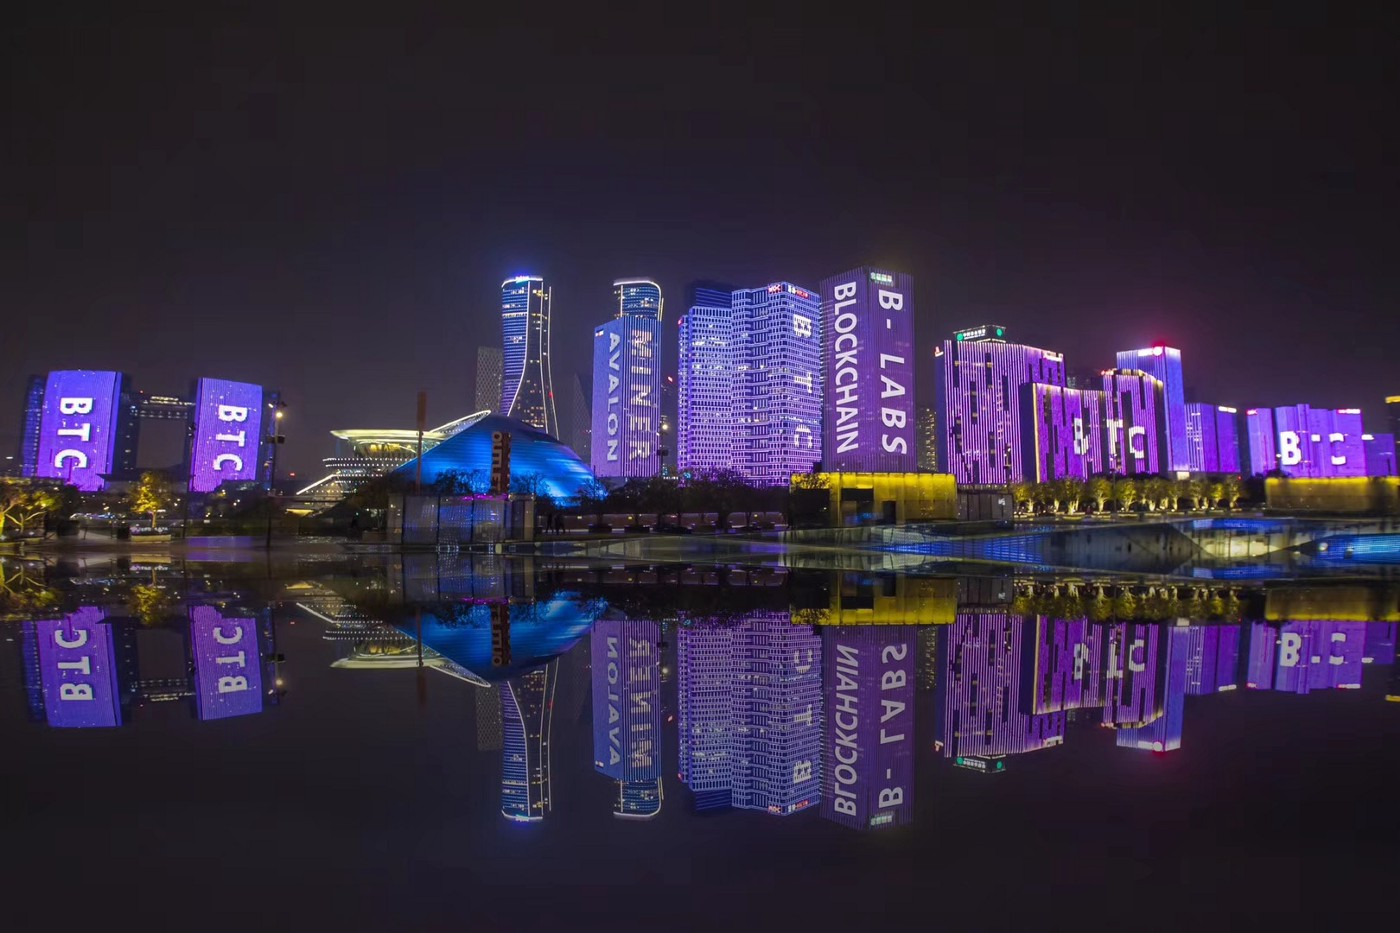 20th Nov. light show showing “BTC”, “Blockchain”, “Miner” was in Hangzhou, China. The building at most left with BTC on it, where Hangzhou city government sits. On 21st Nov., the Hangzhou-based bitcoin mining giant Canaan is listed on NASDAQ.